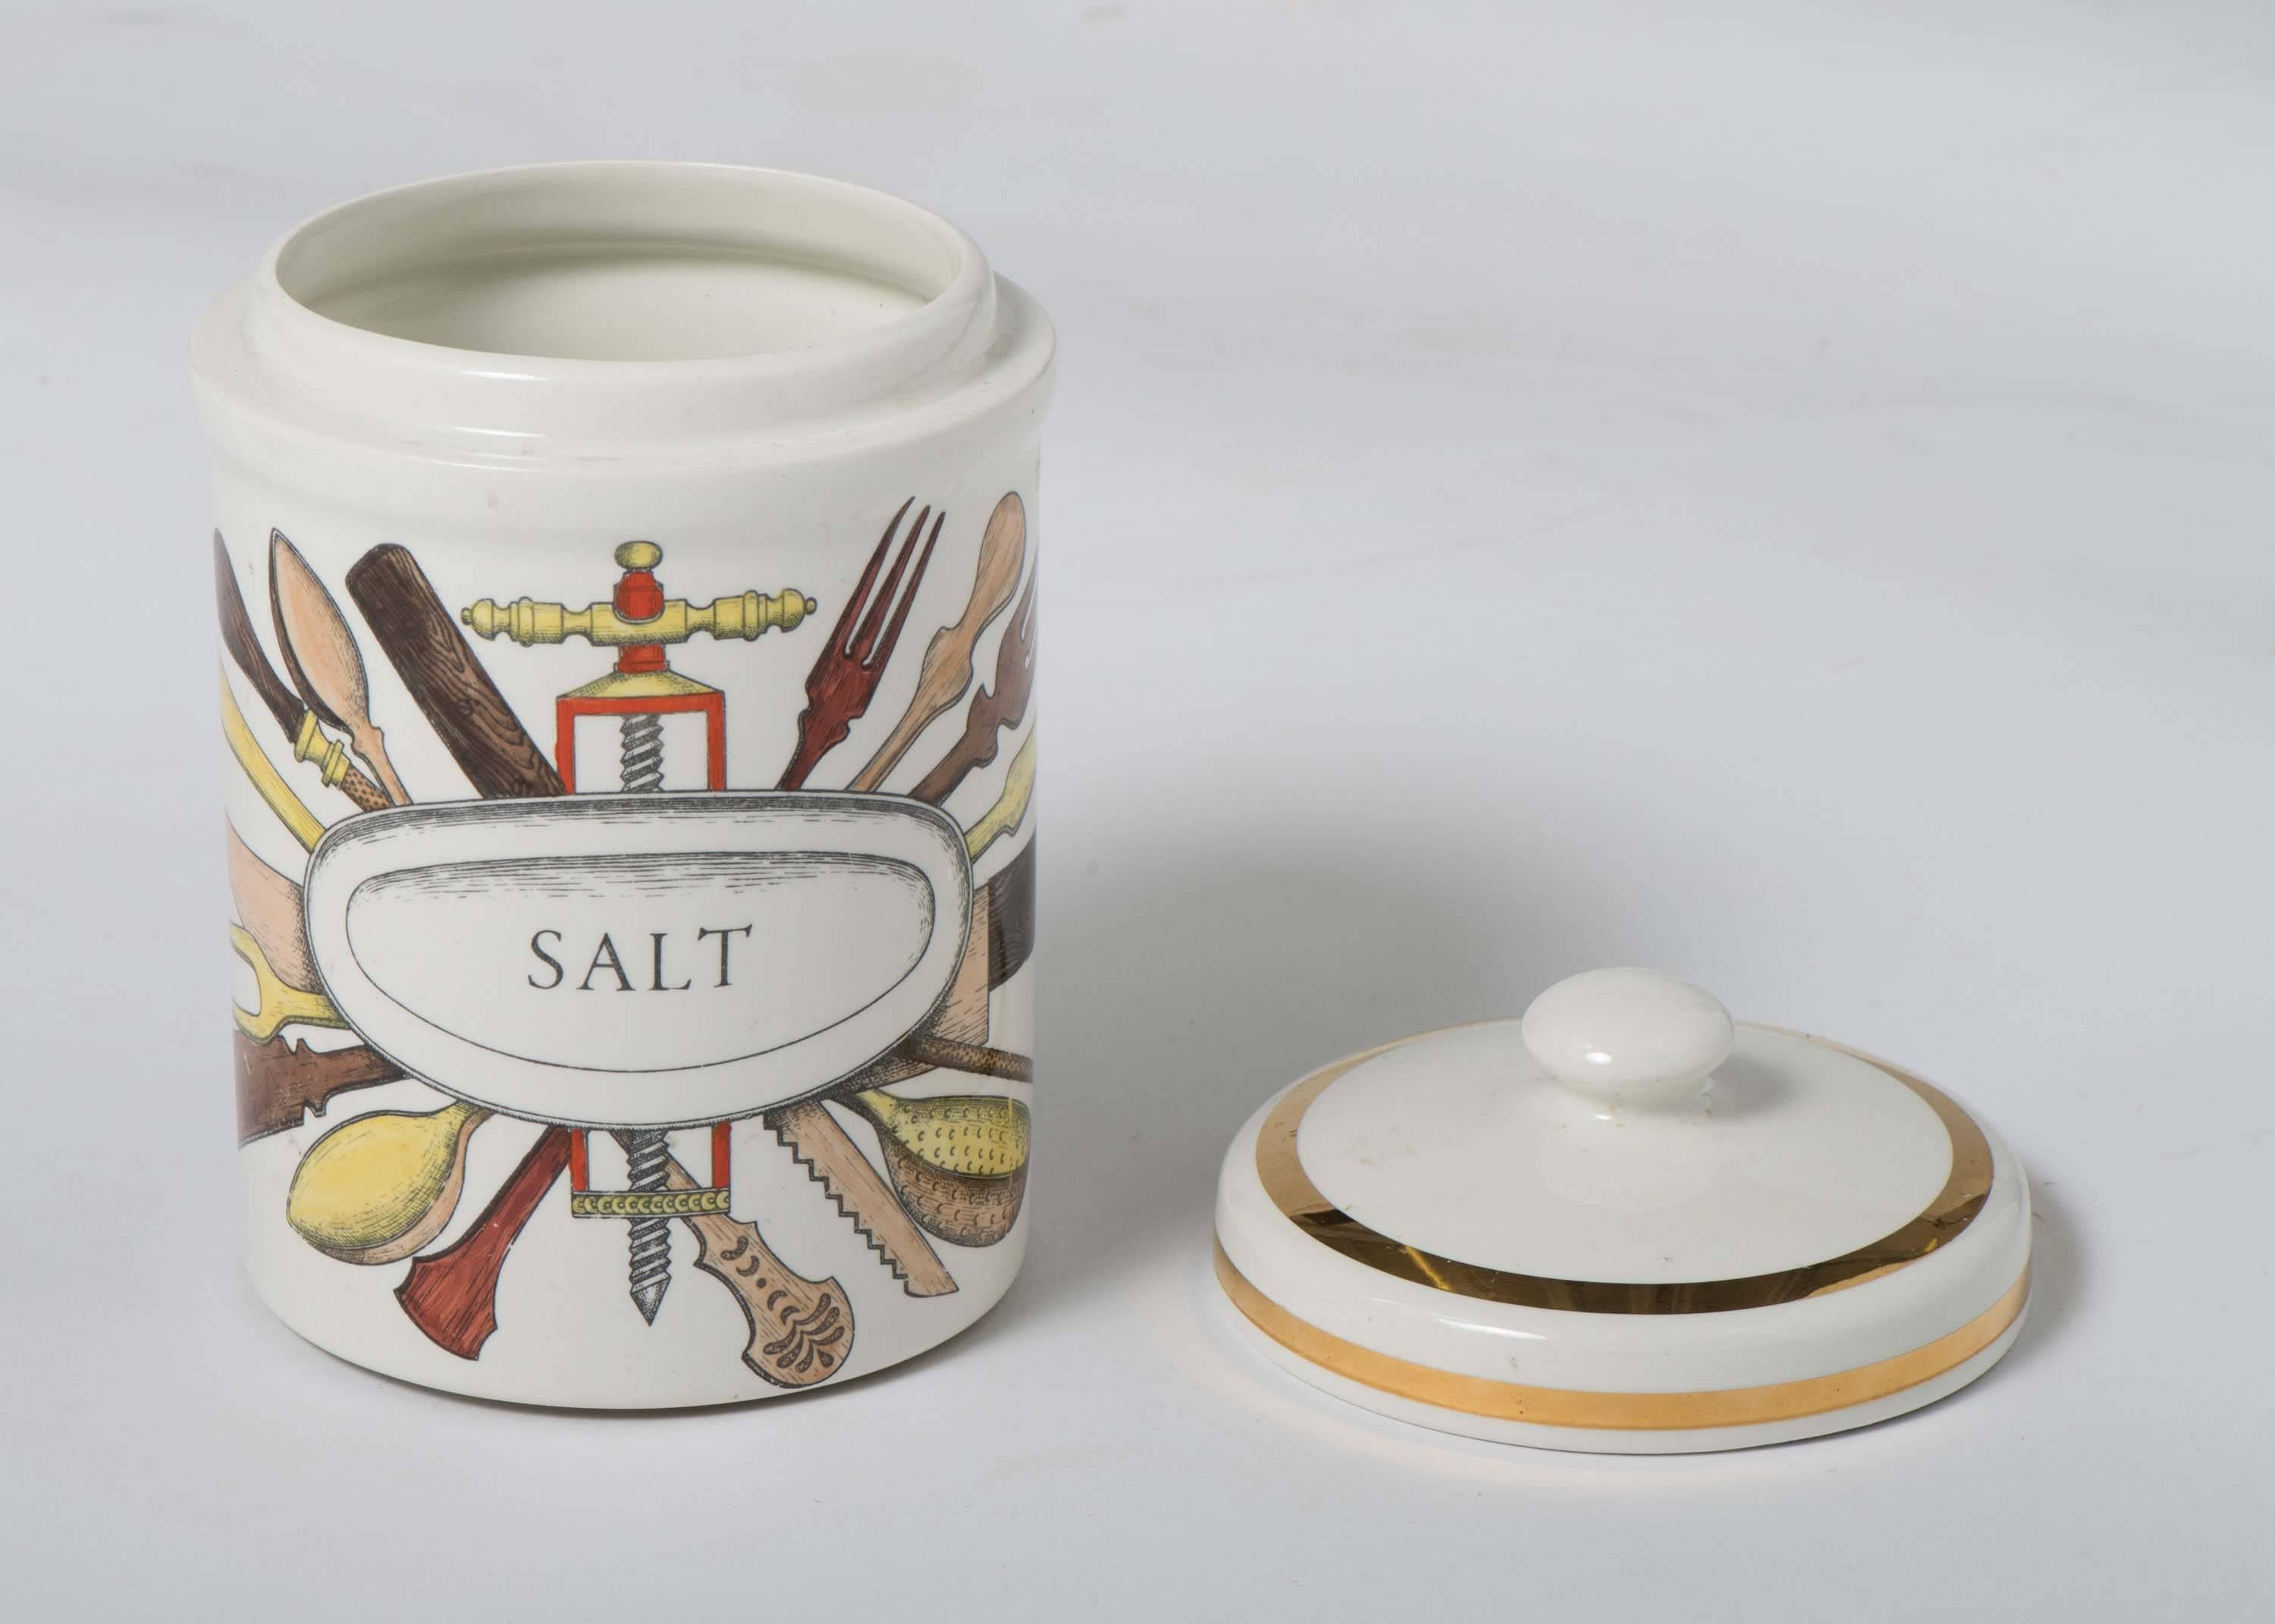 An early porcelain jar by Piero Fornasetti,
“salt.”
Lithographically printed and hand-painted.
Mark to base.
Italy, circa 1960.
Measures: 17.5 cm high x 12 cm diameter.